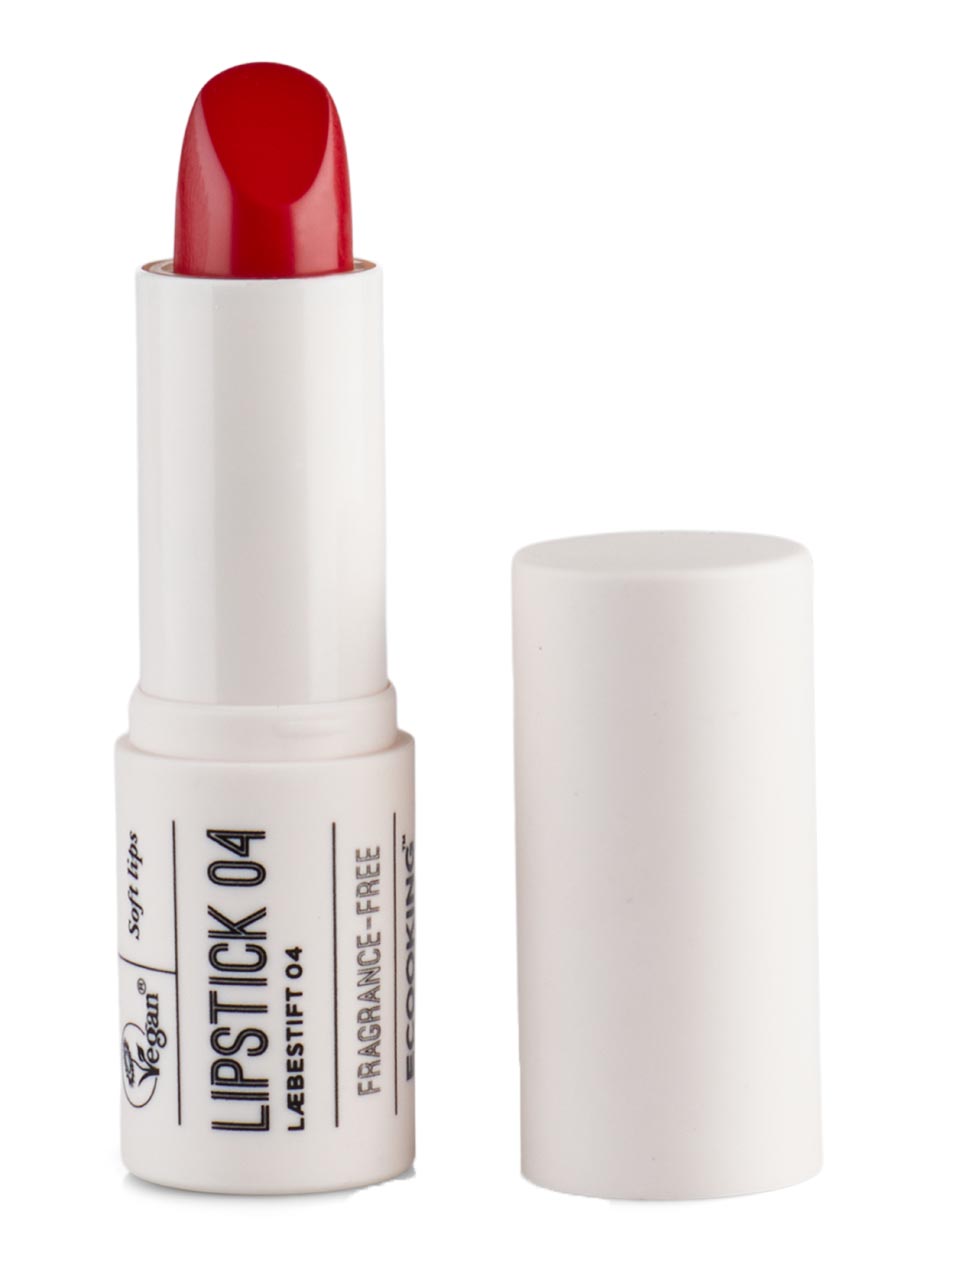 Ecooking Make-up Lipstick N° 04 Flamenco red null - onesize - 1